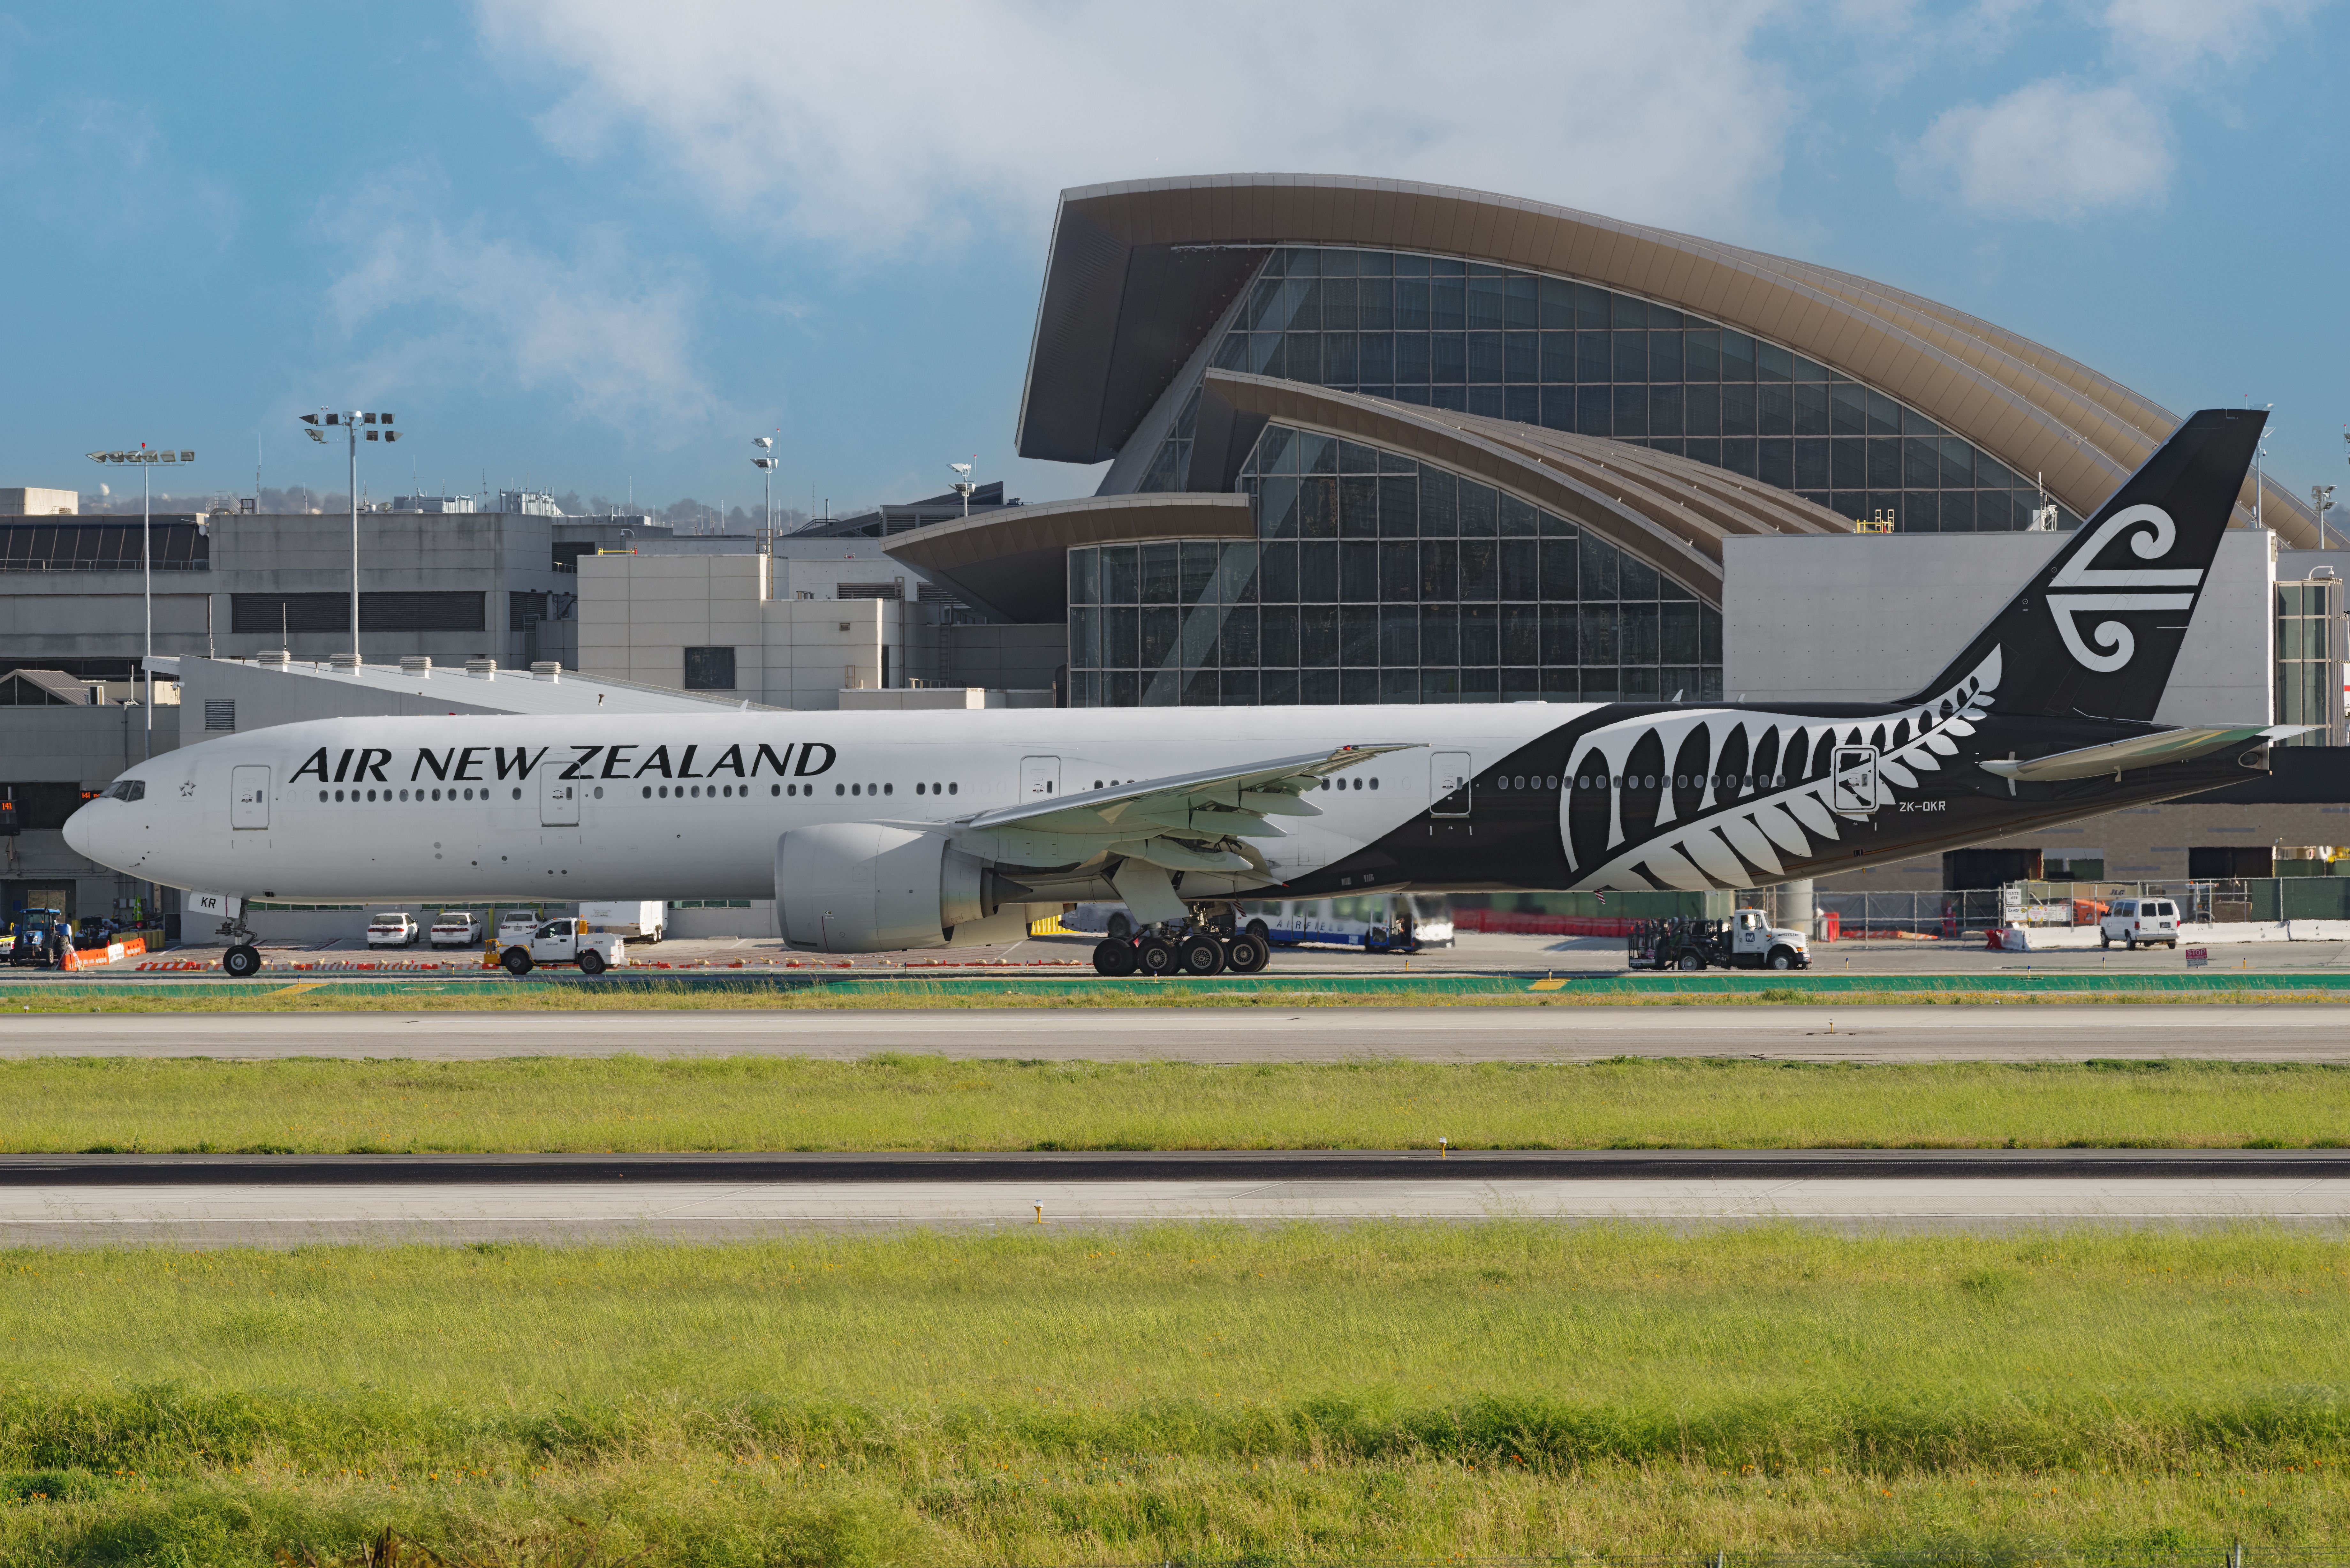 Air New Zealand Boeing 777-319ER (ZK-OKR) at Los Angeles International Airport.